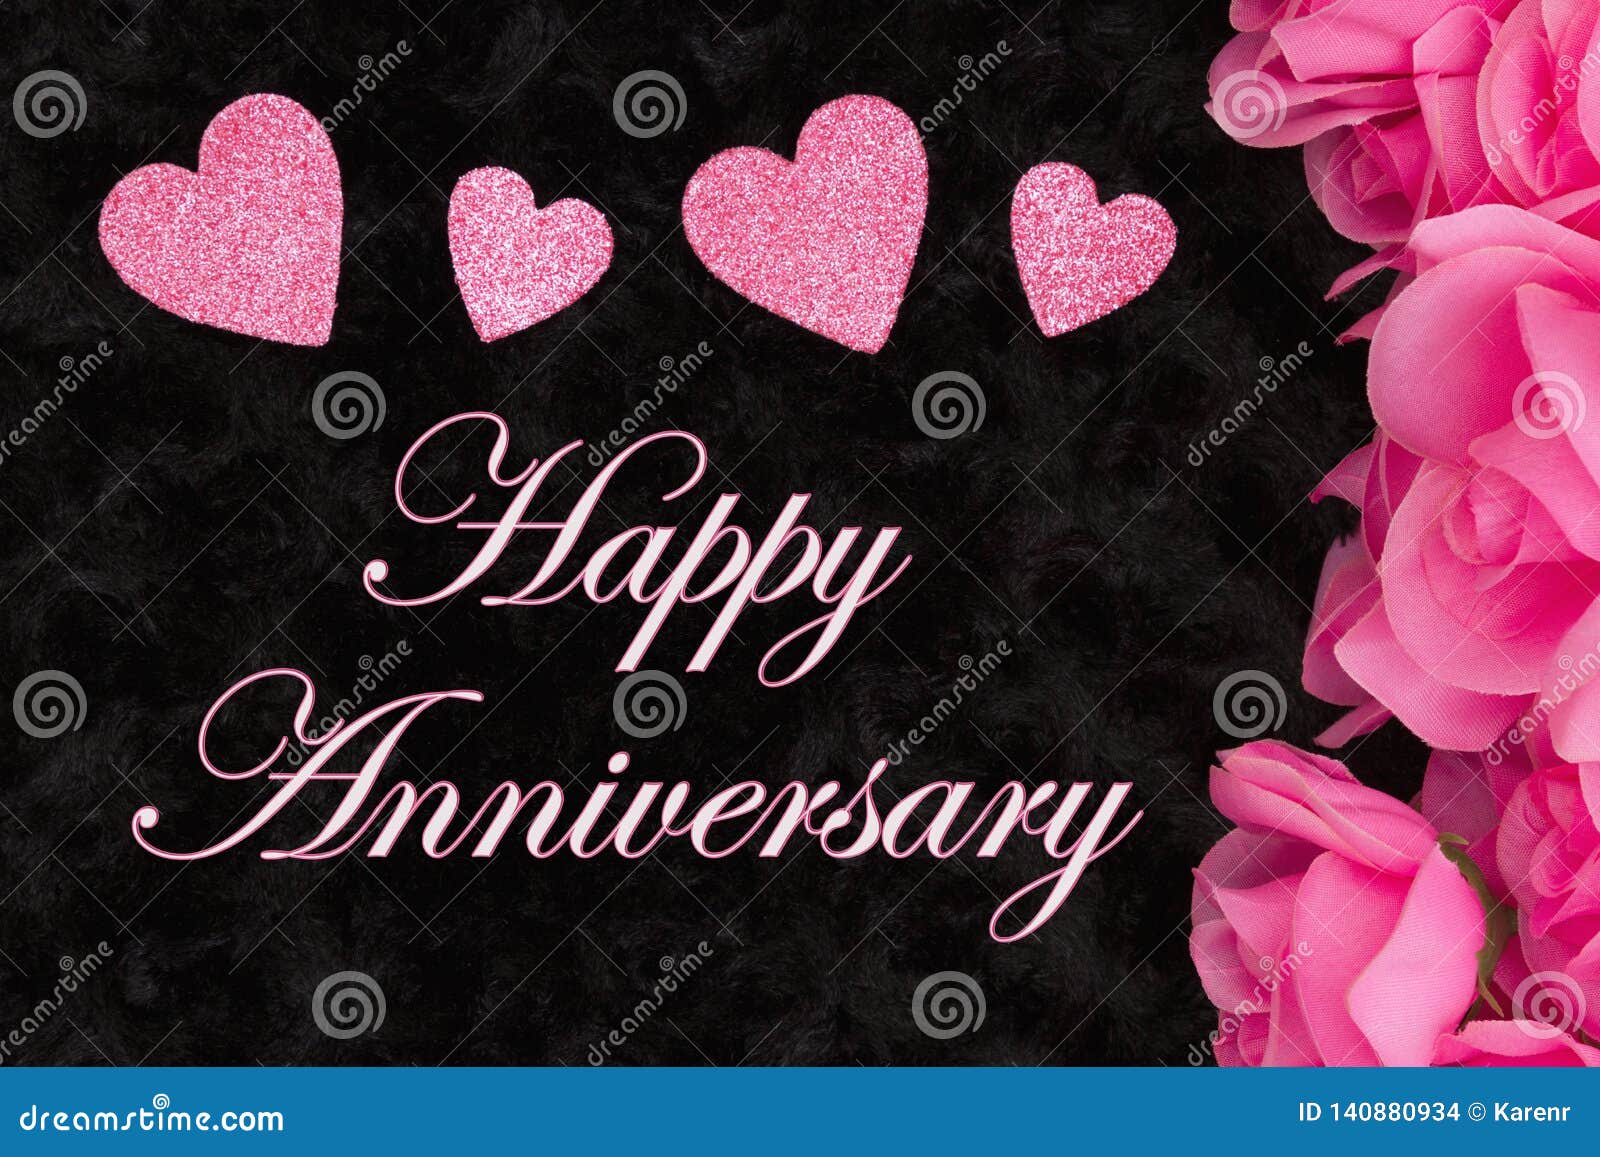 Happy Anniversary Greeting with Pink Roses Stock Photo - Image of ...